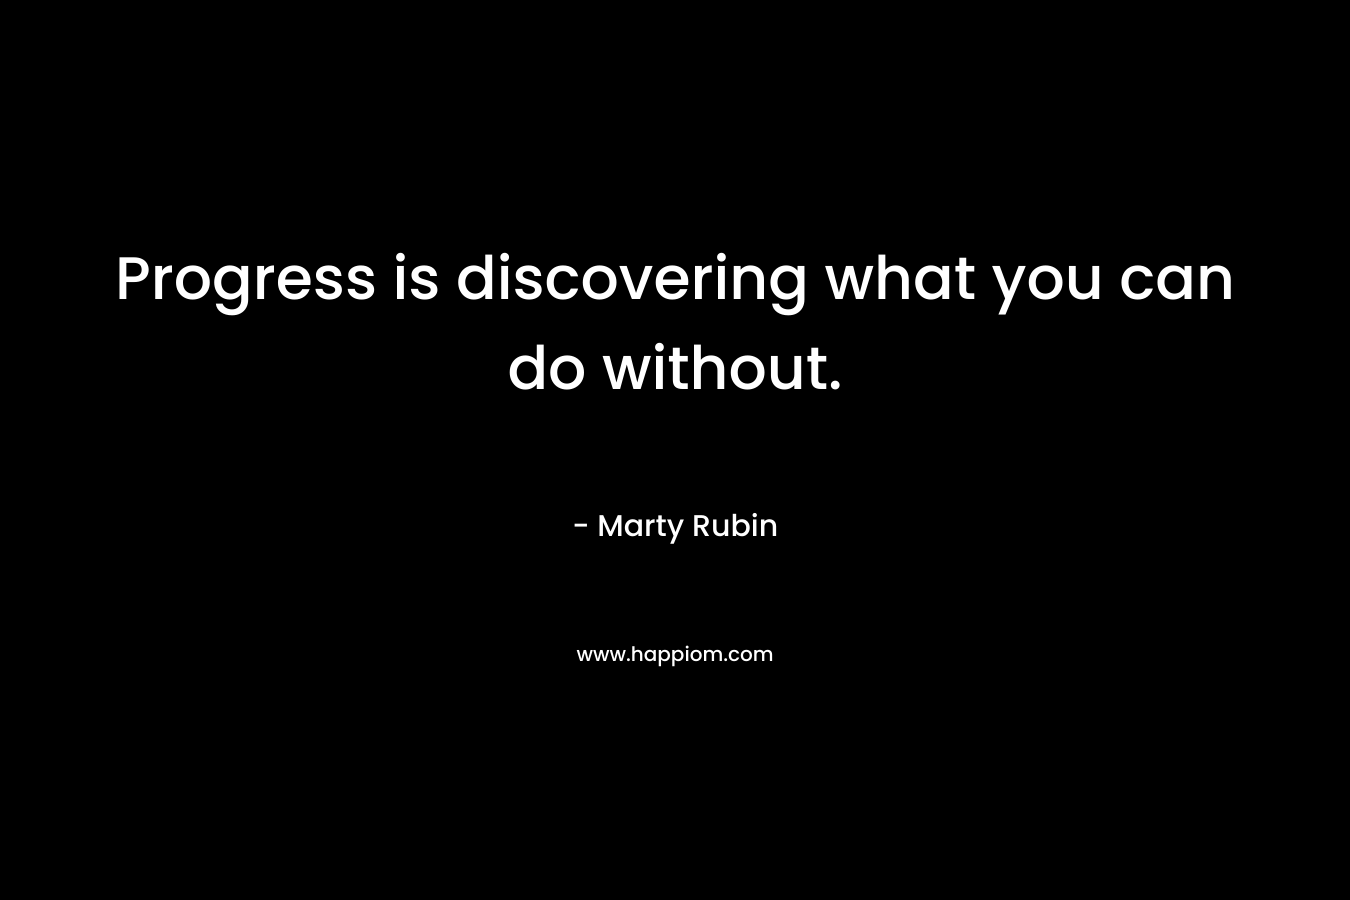 Progress is discovering what you can do without. – Marty Rubin